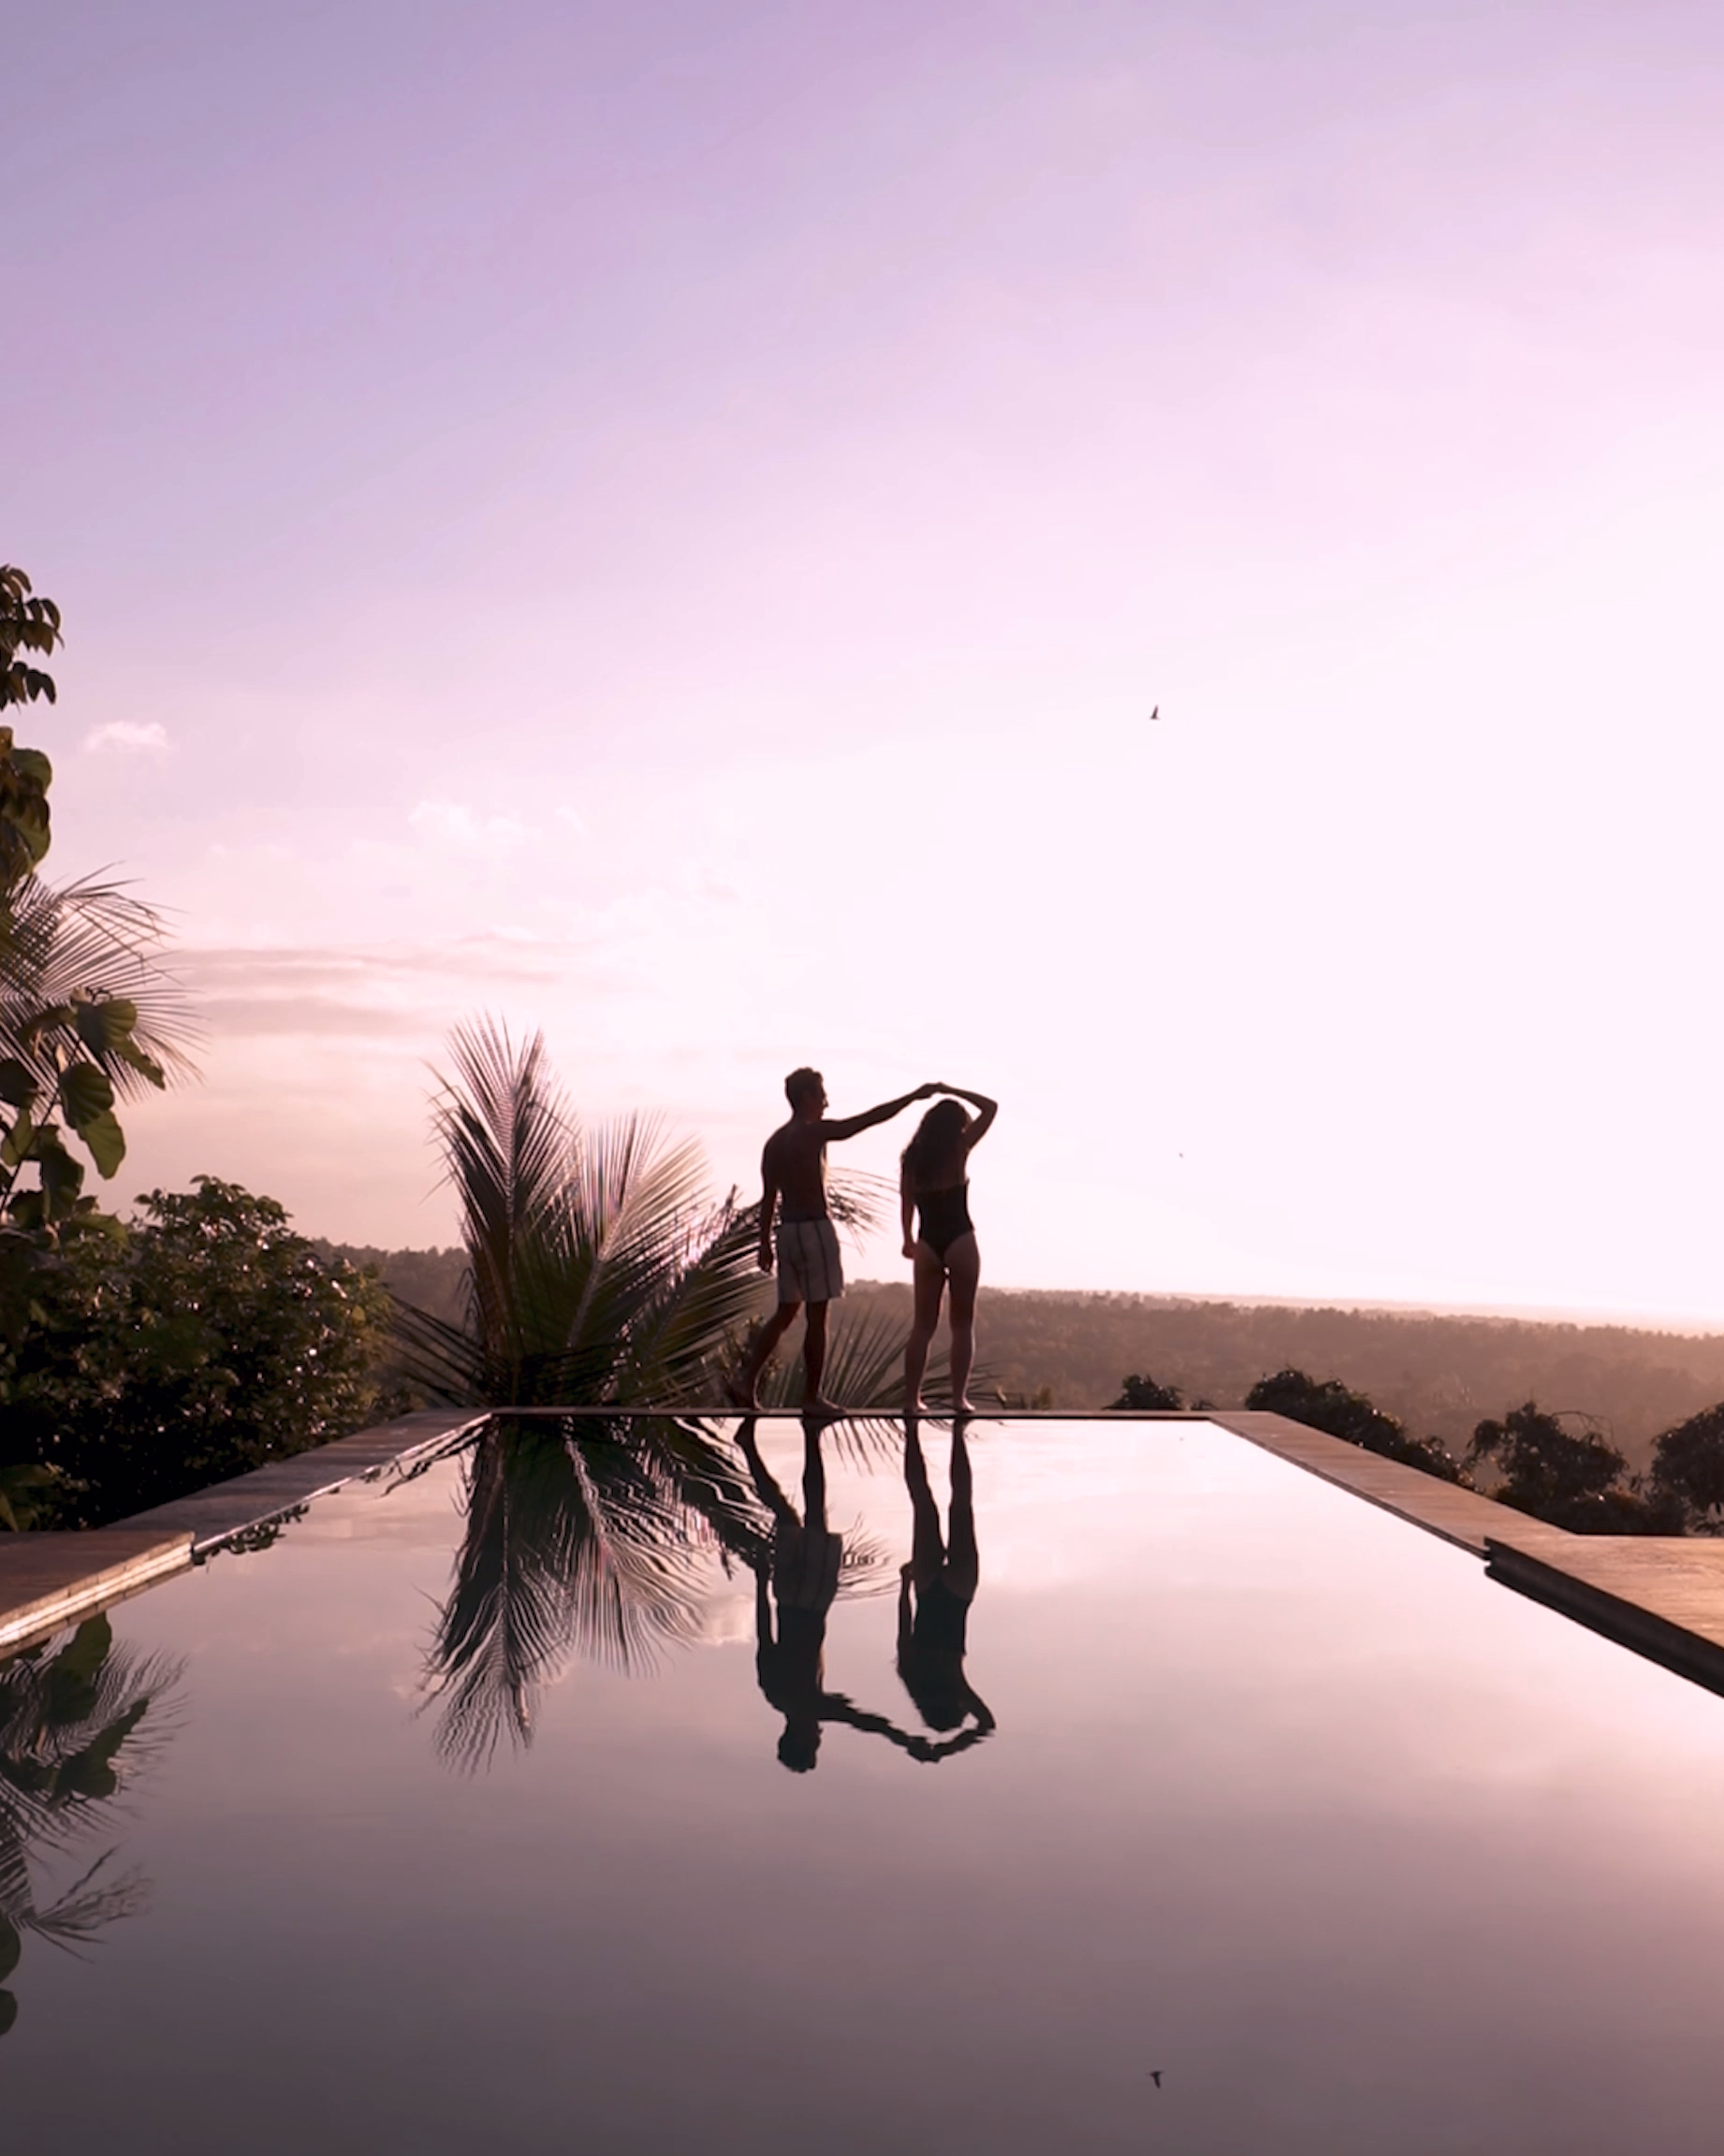 Travel Couple Goals - Infinity Pool Sunset in Bali -   21 travel destinations Videos photography ideas